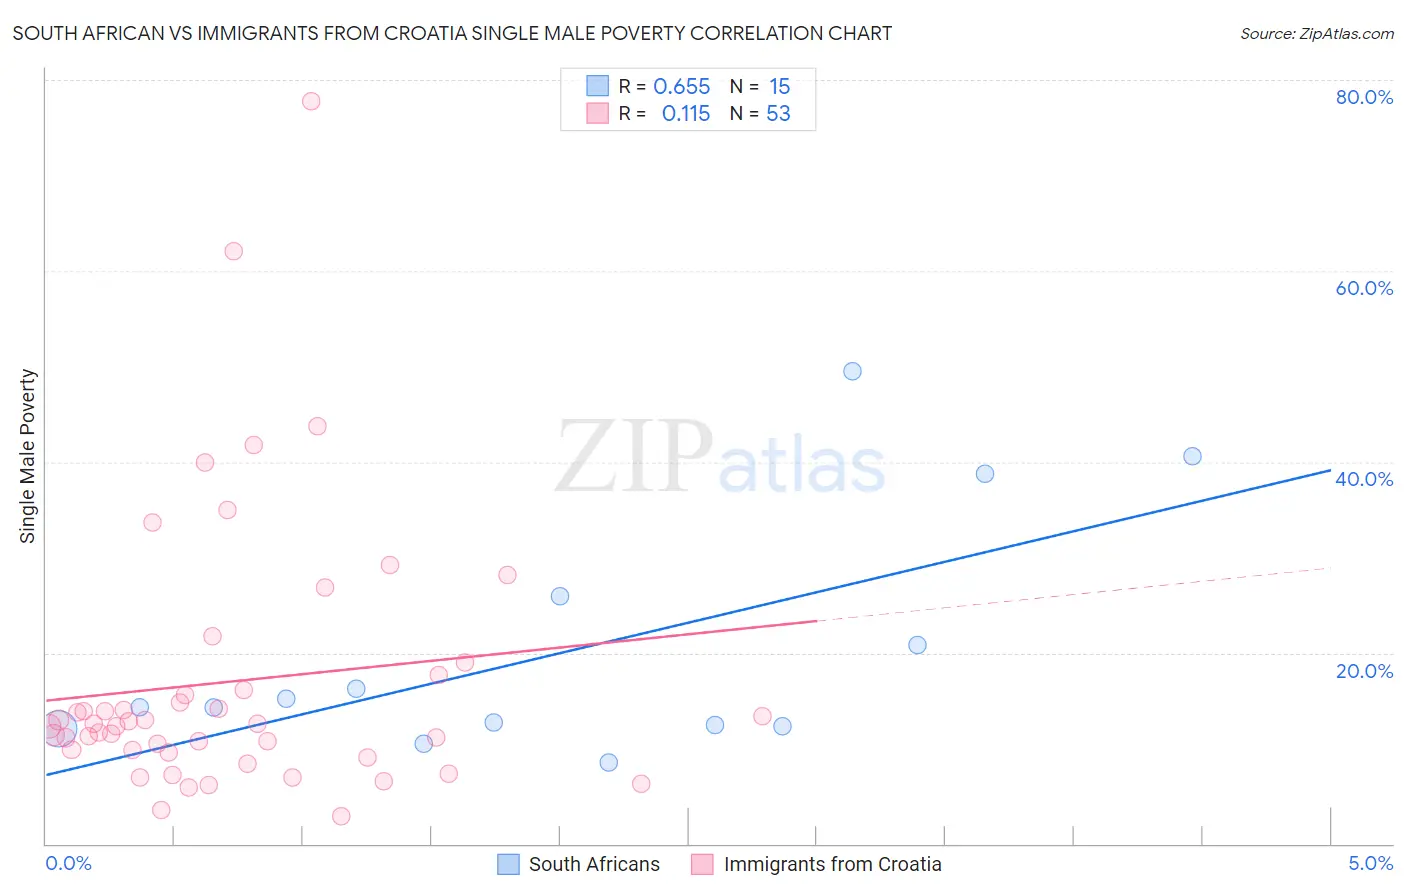 South African vs Immigrants from Croatia Single Male Poverty